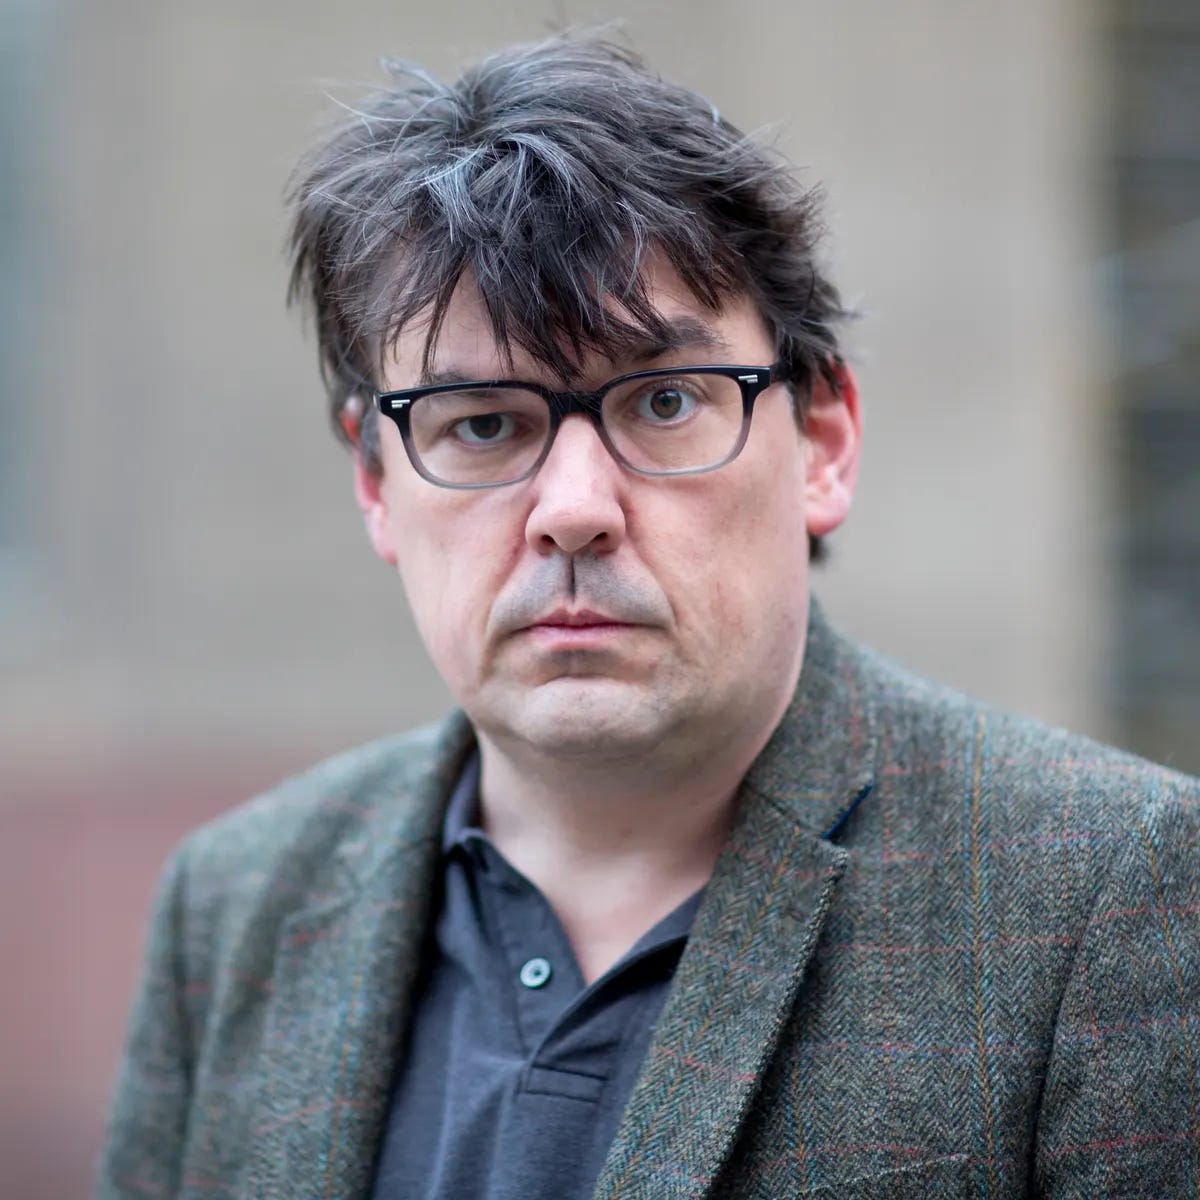 Graham Linehan, seen here without the love of his family... 